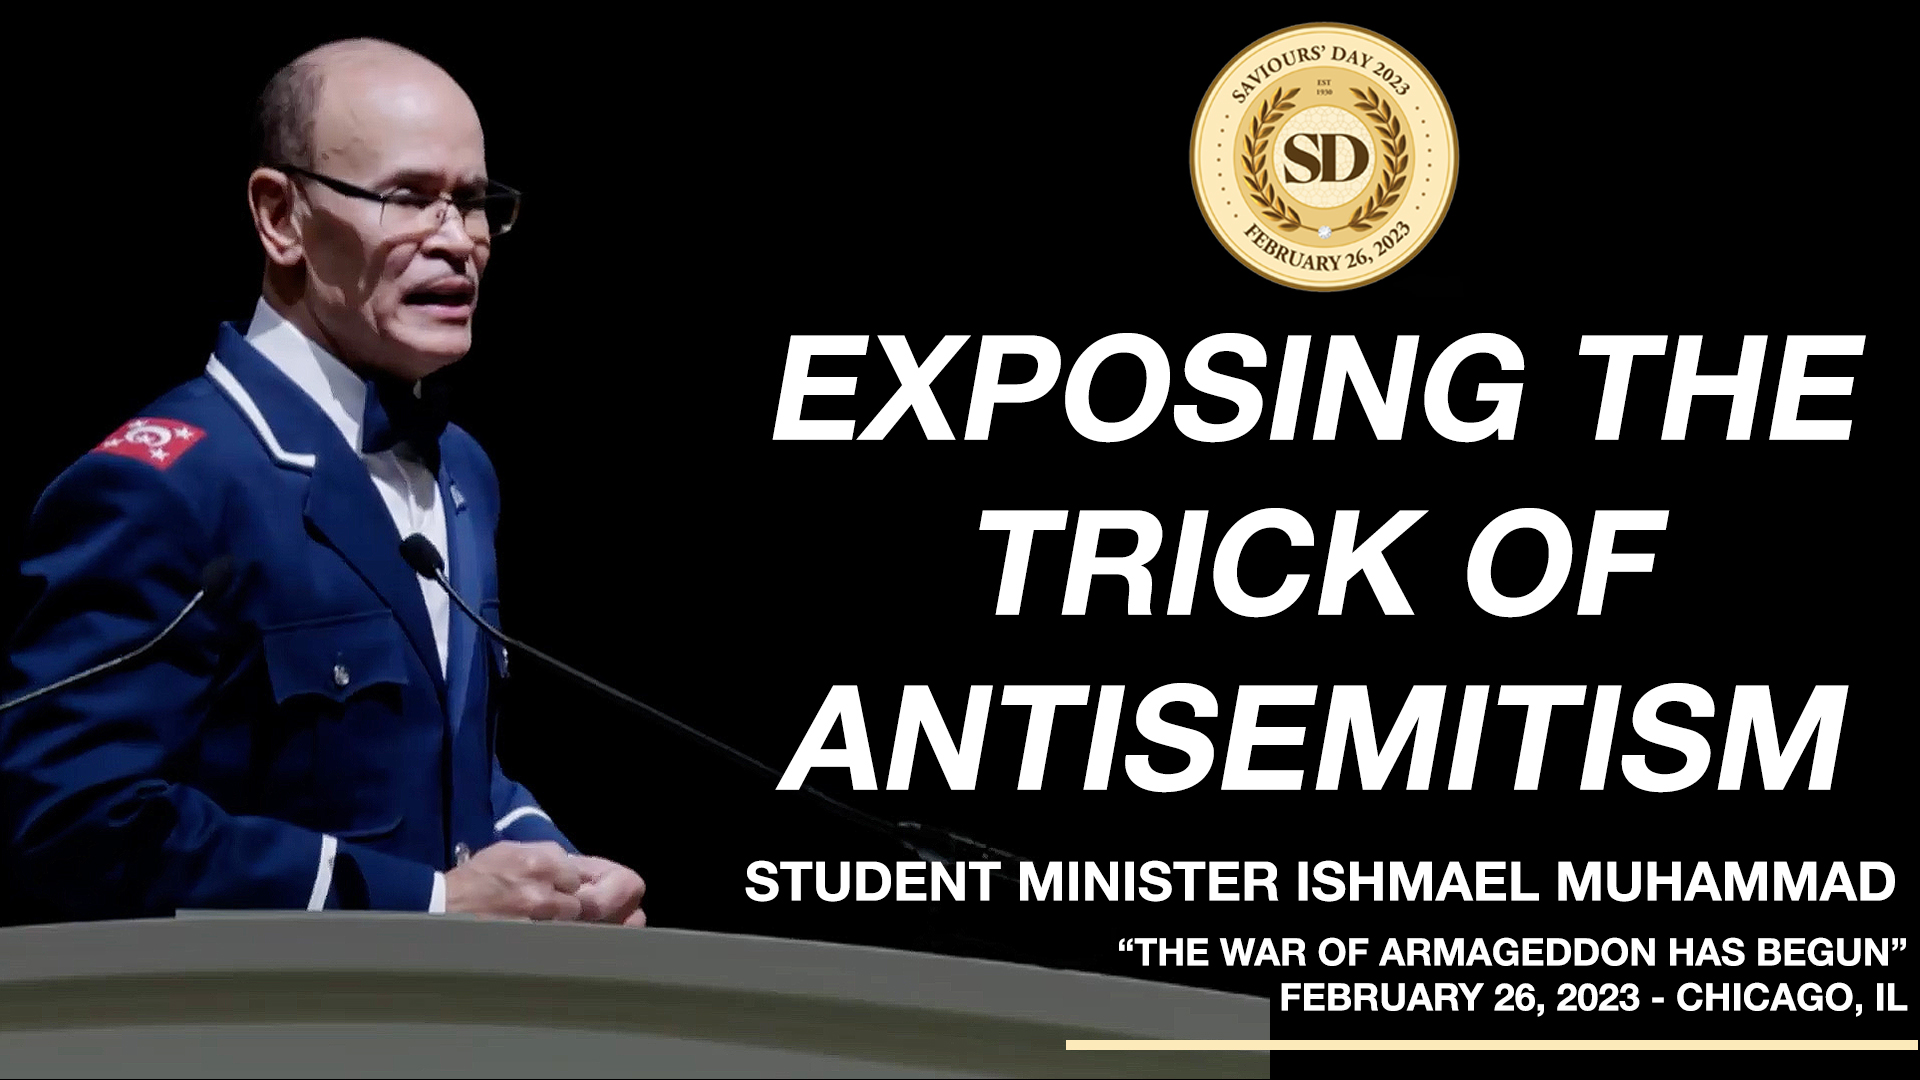 Exposing the Tricks and Lies of the Charge of Antisemitism